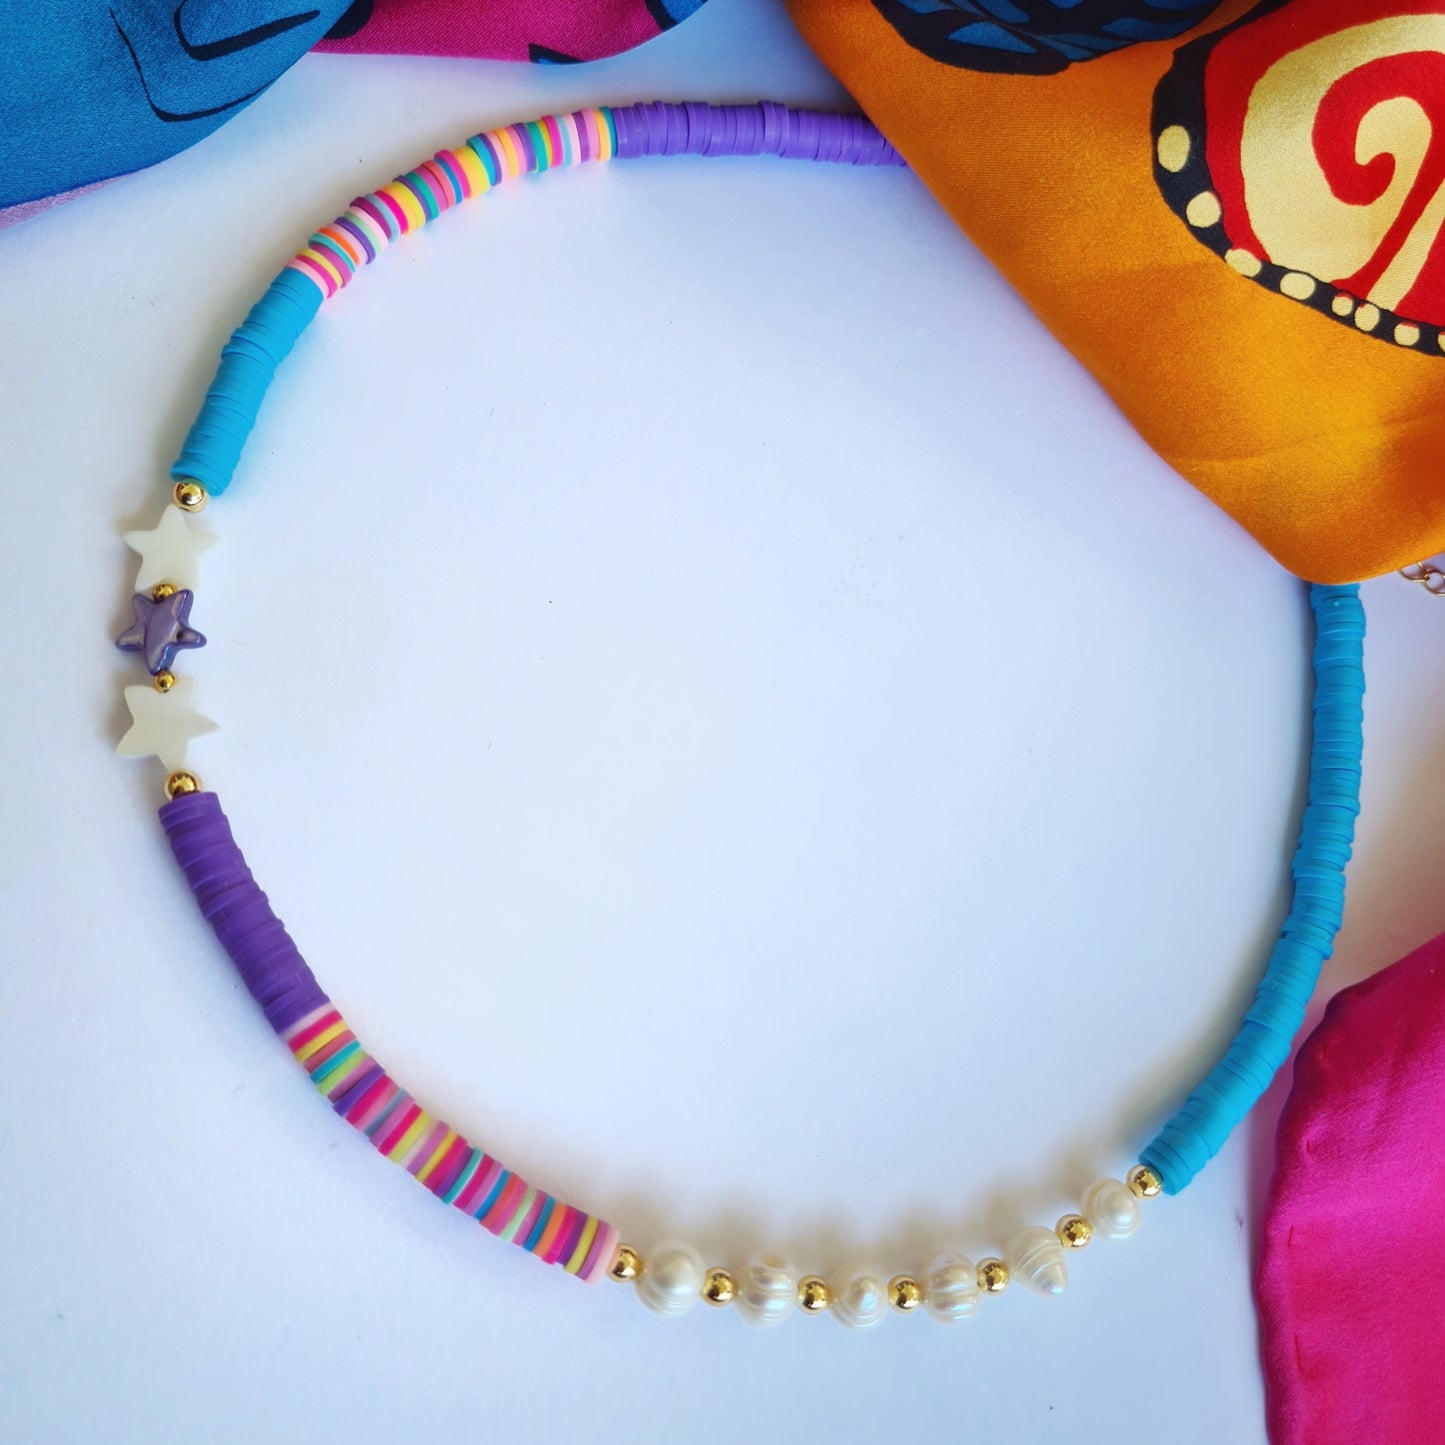 Surfer beads necklace